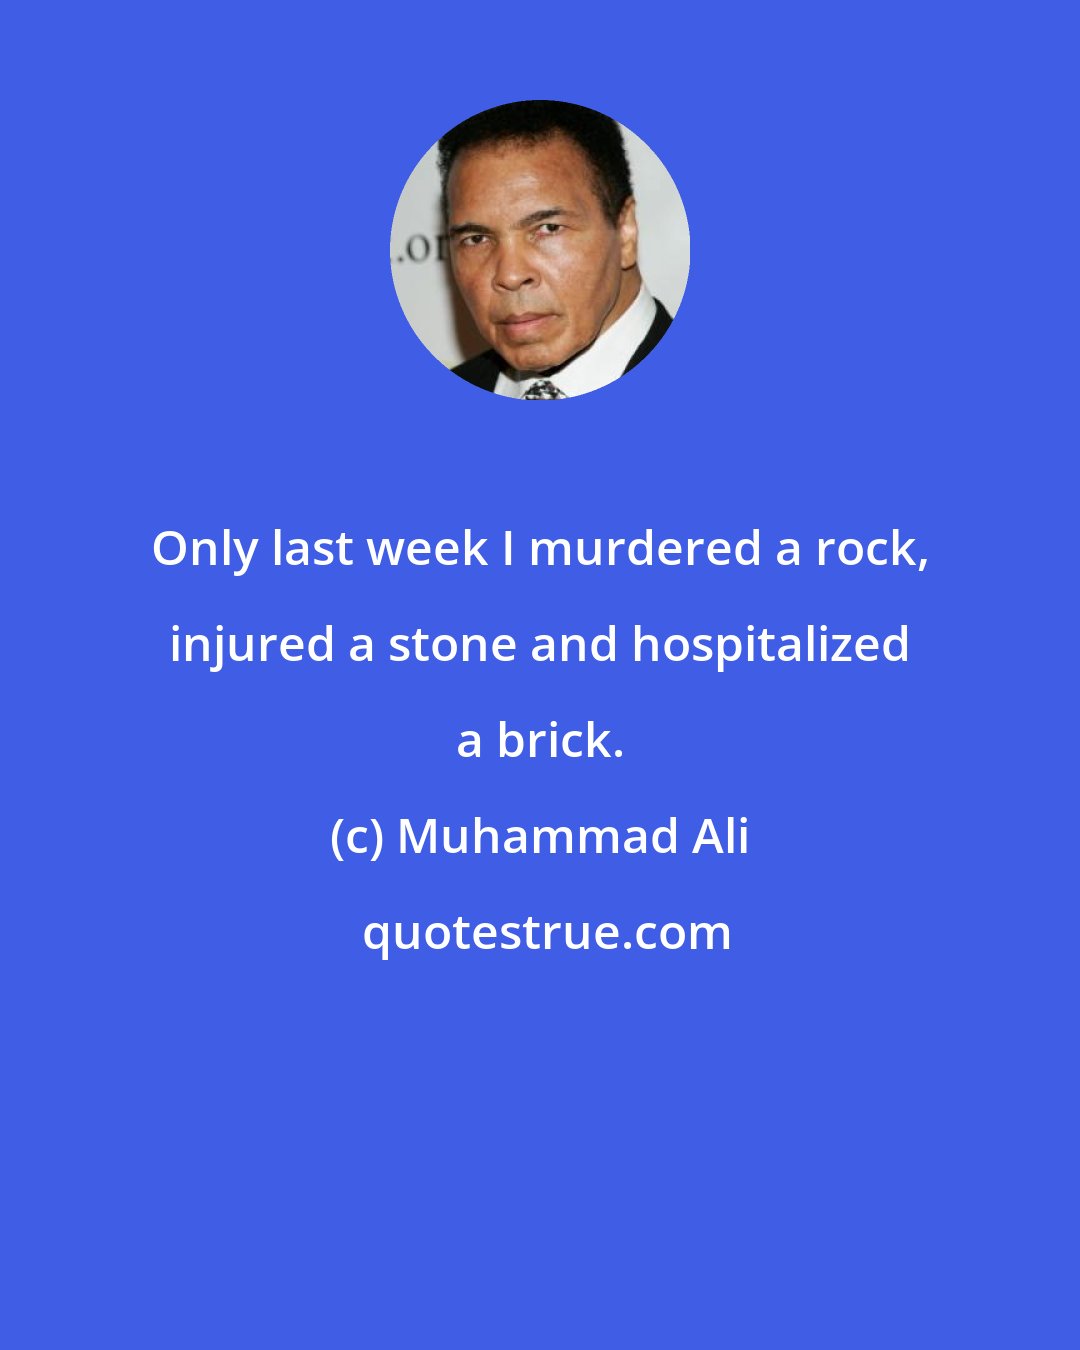 Muhammad Ali: Only last week I murdered a rock, injured a stone and hospitalized a brick.